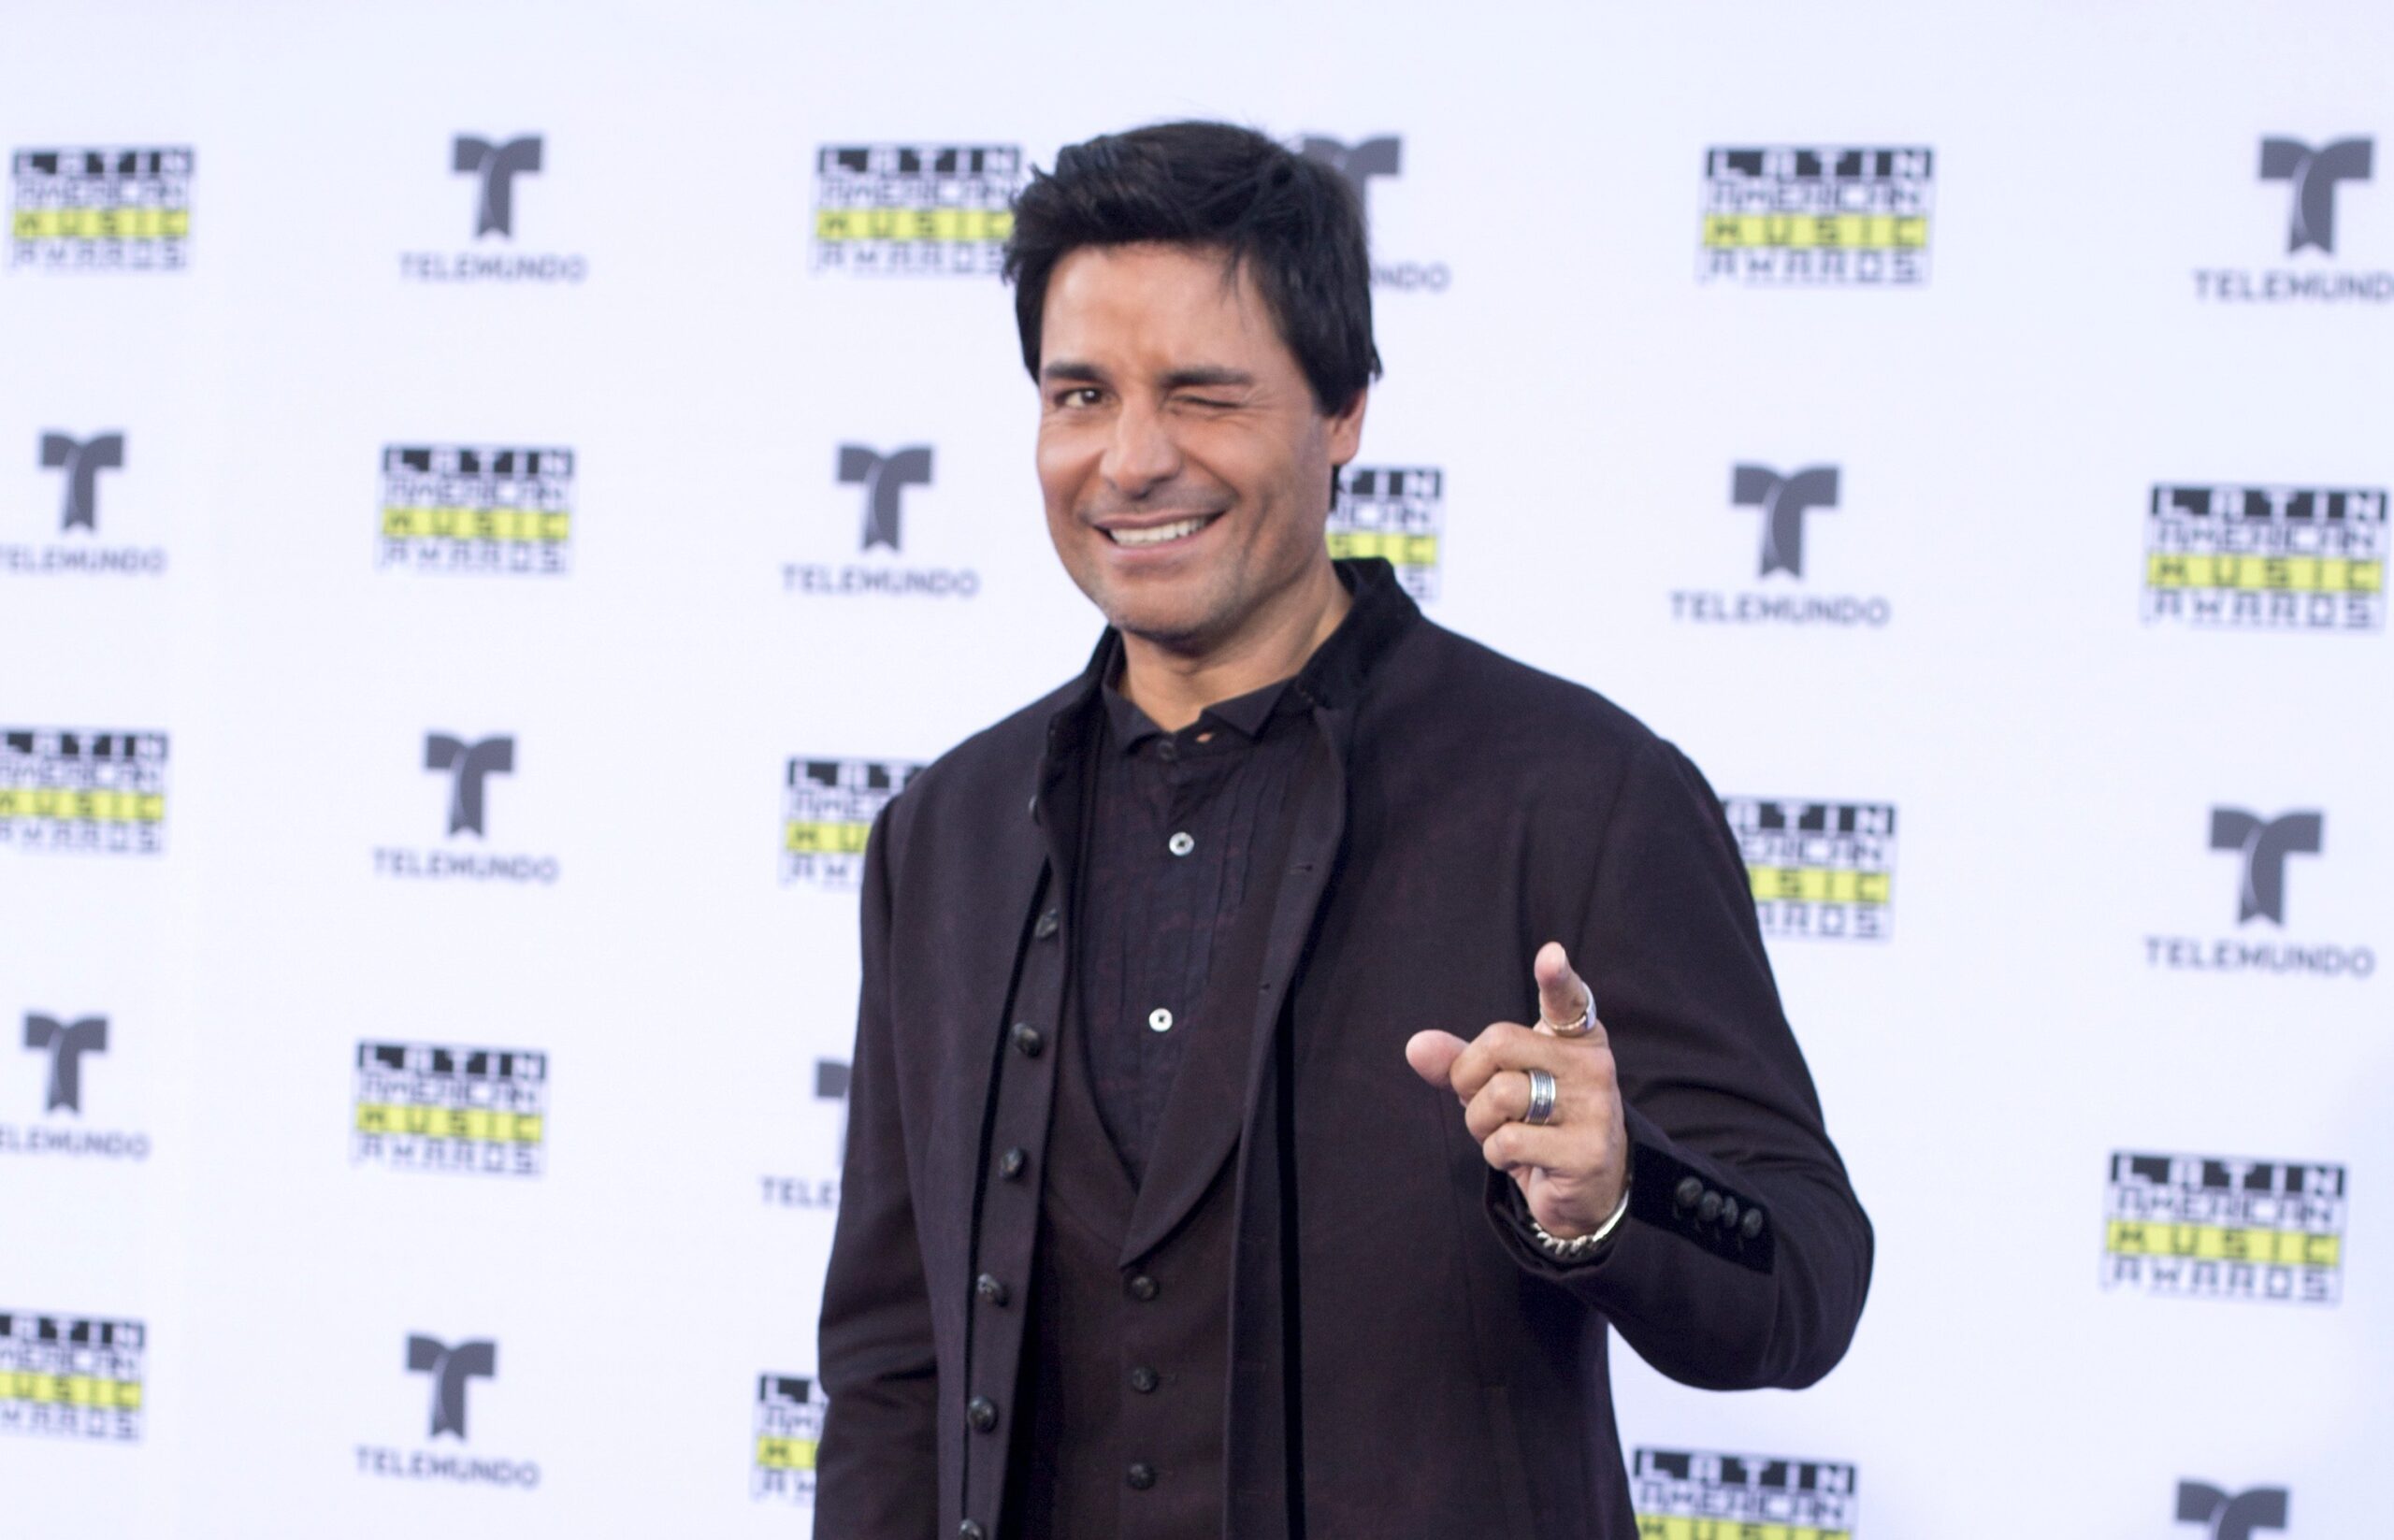 chayanne-lights-up-social-networks-by-announcing-a-surprise-for-his-fans;-will-there-be-a-tour-of-latin-america?